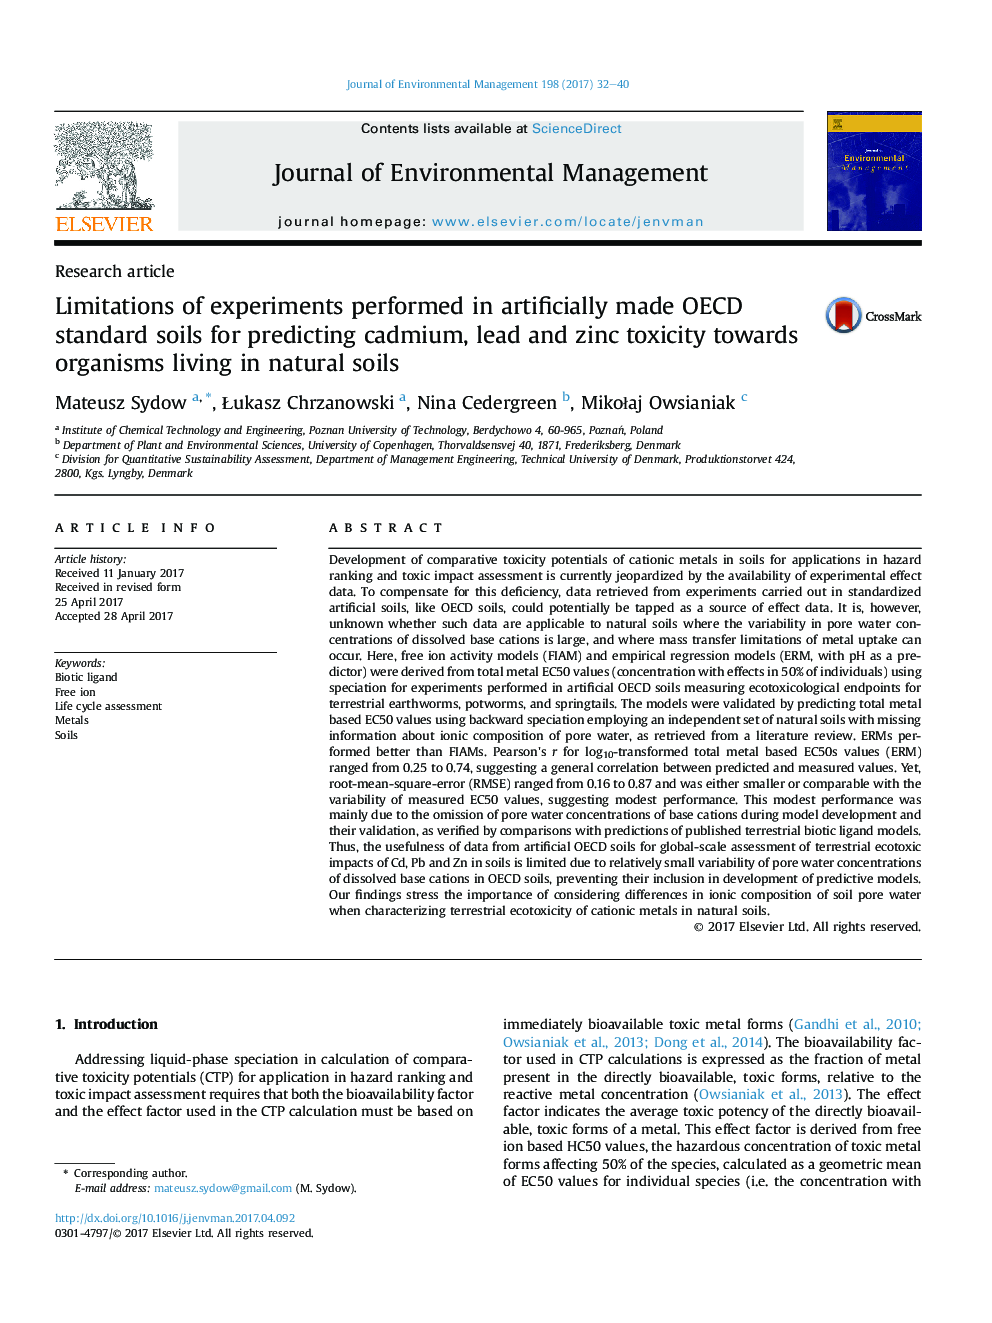 Limitations of experiments performed in artificially made OECD standard soils for predicting cadmium, lead and zinc toxicity towards organisms living in natural soils